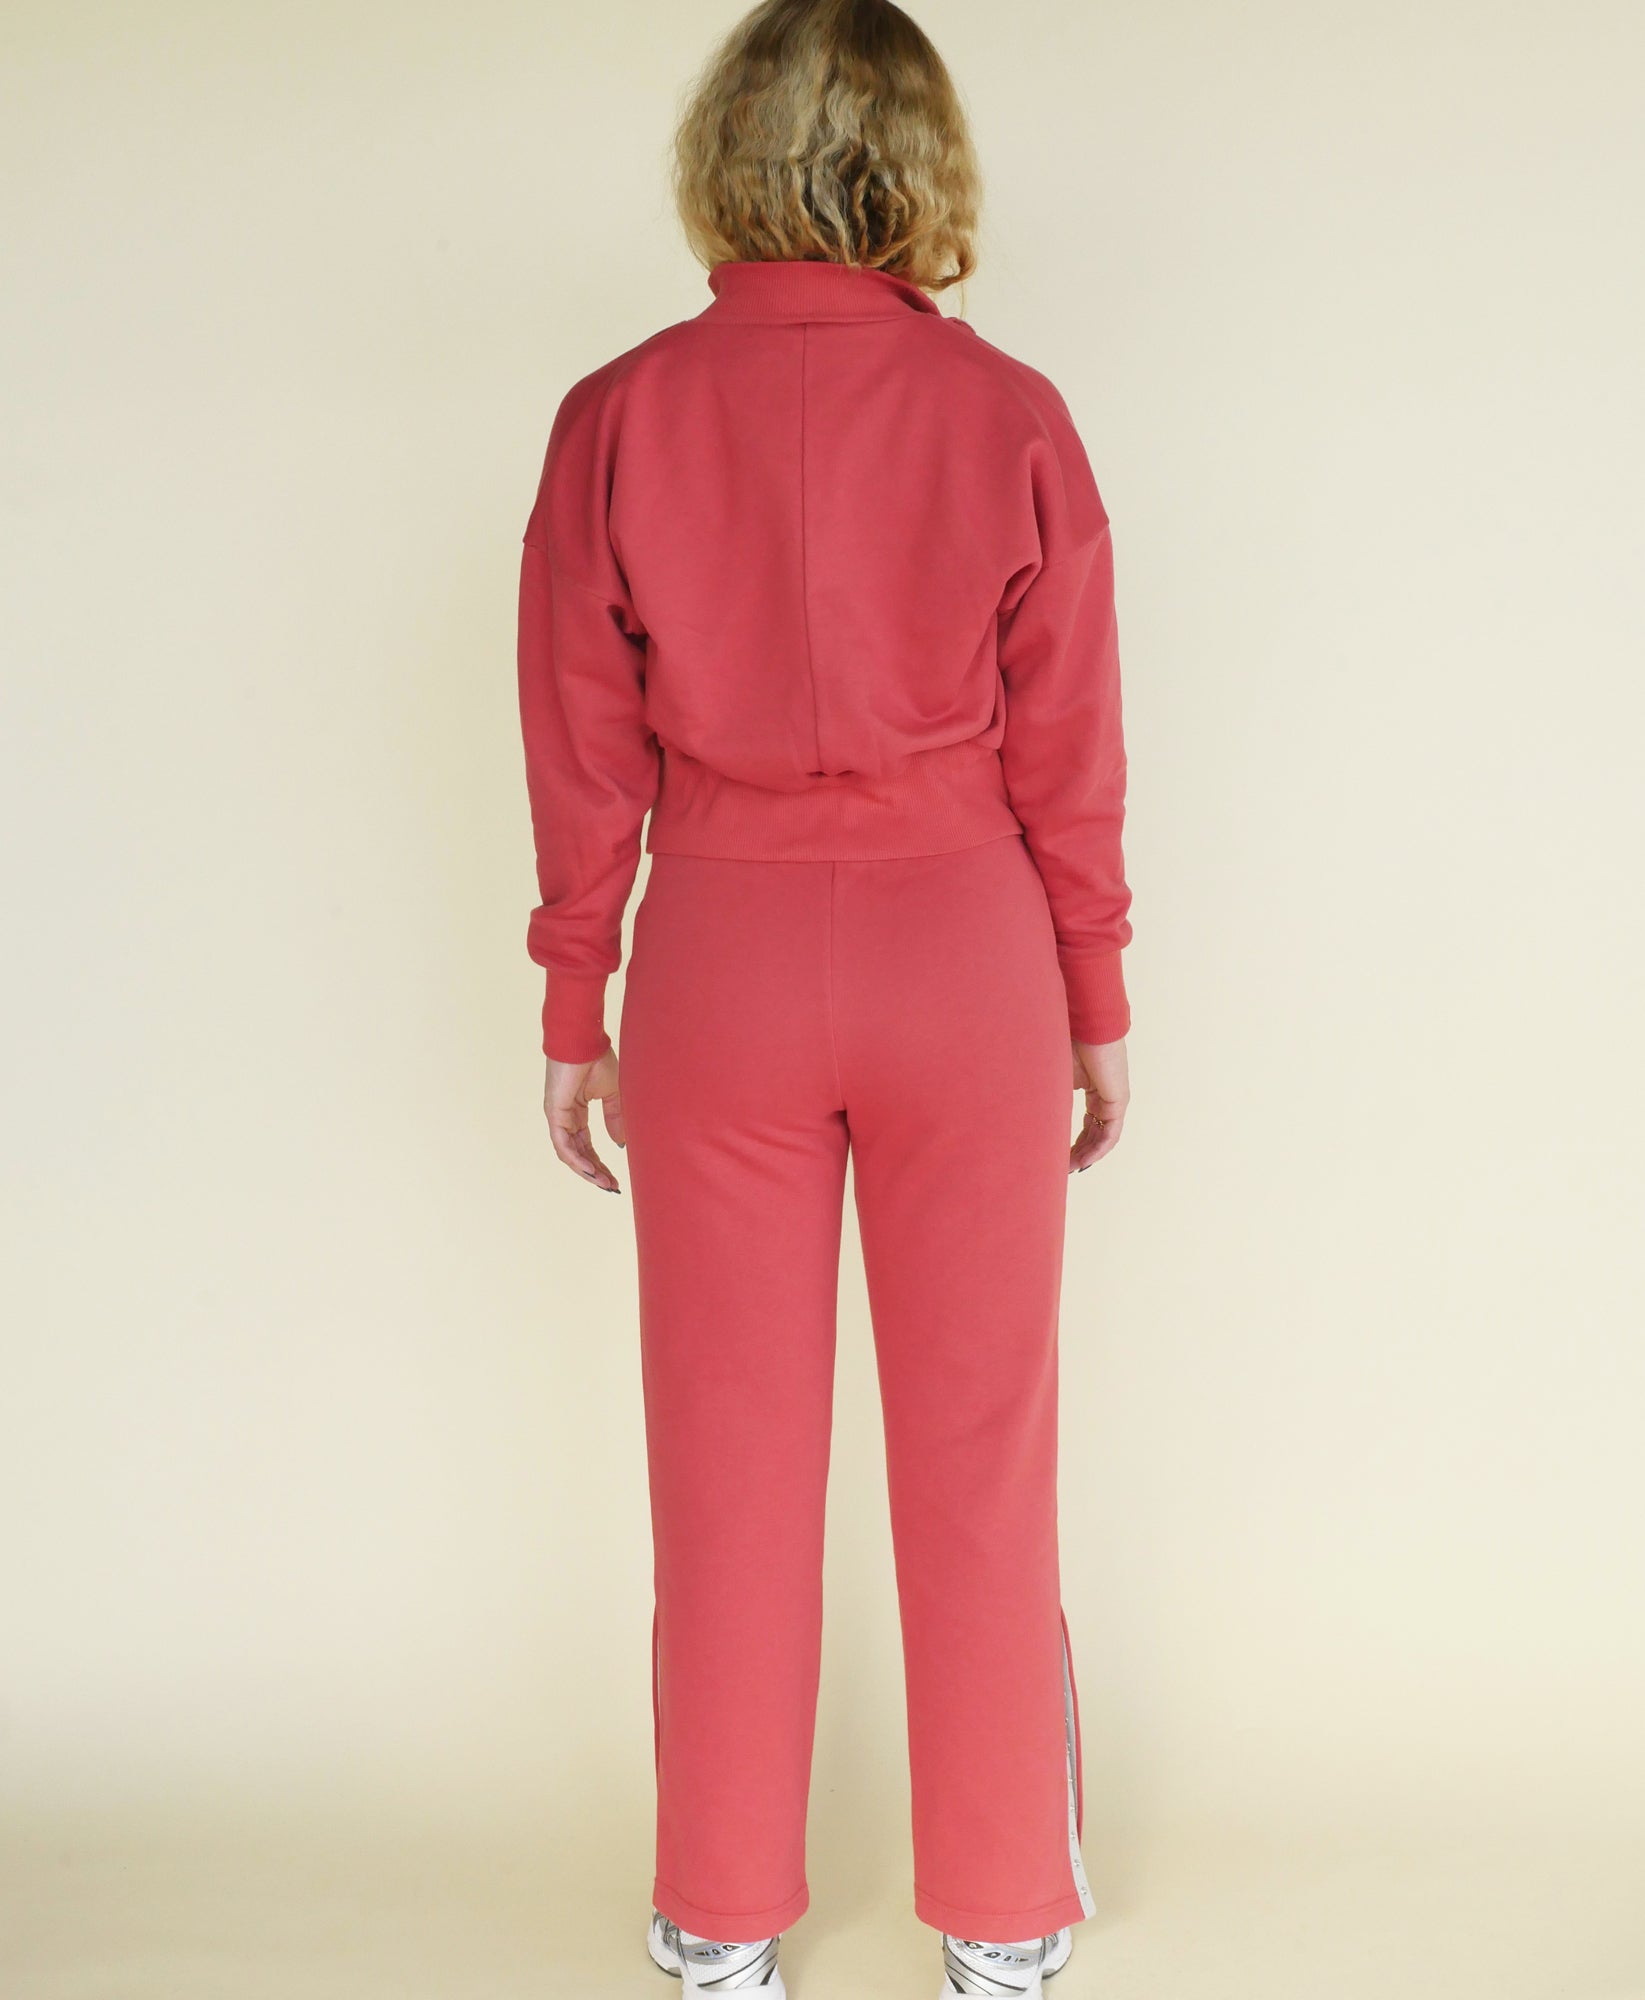 Wear One's At Snapfront Sweatshirt in Sepia on Model Full Back View with Sweatpants